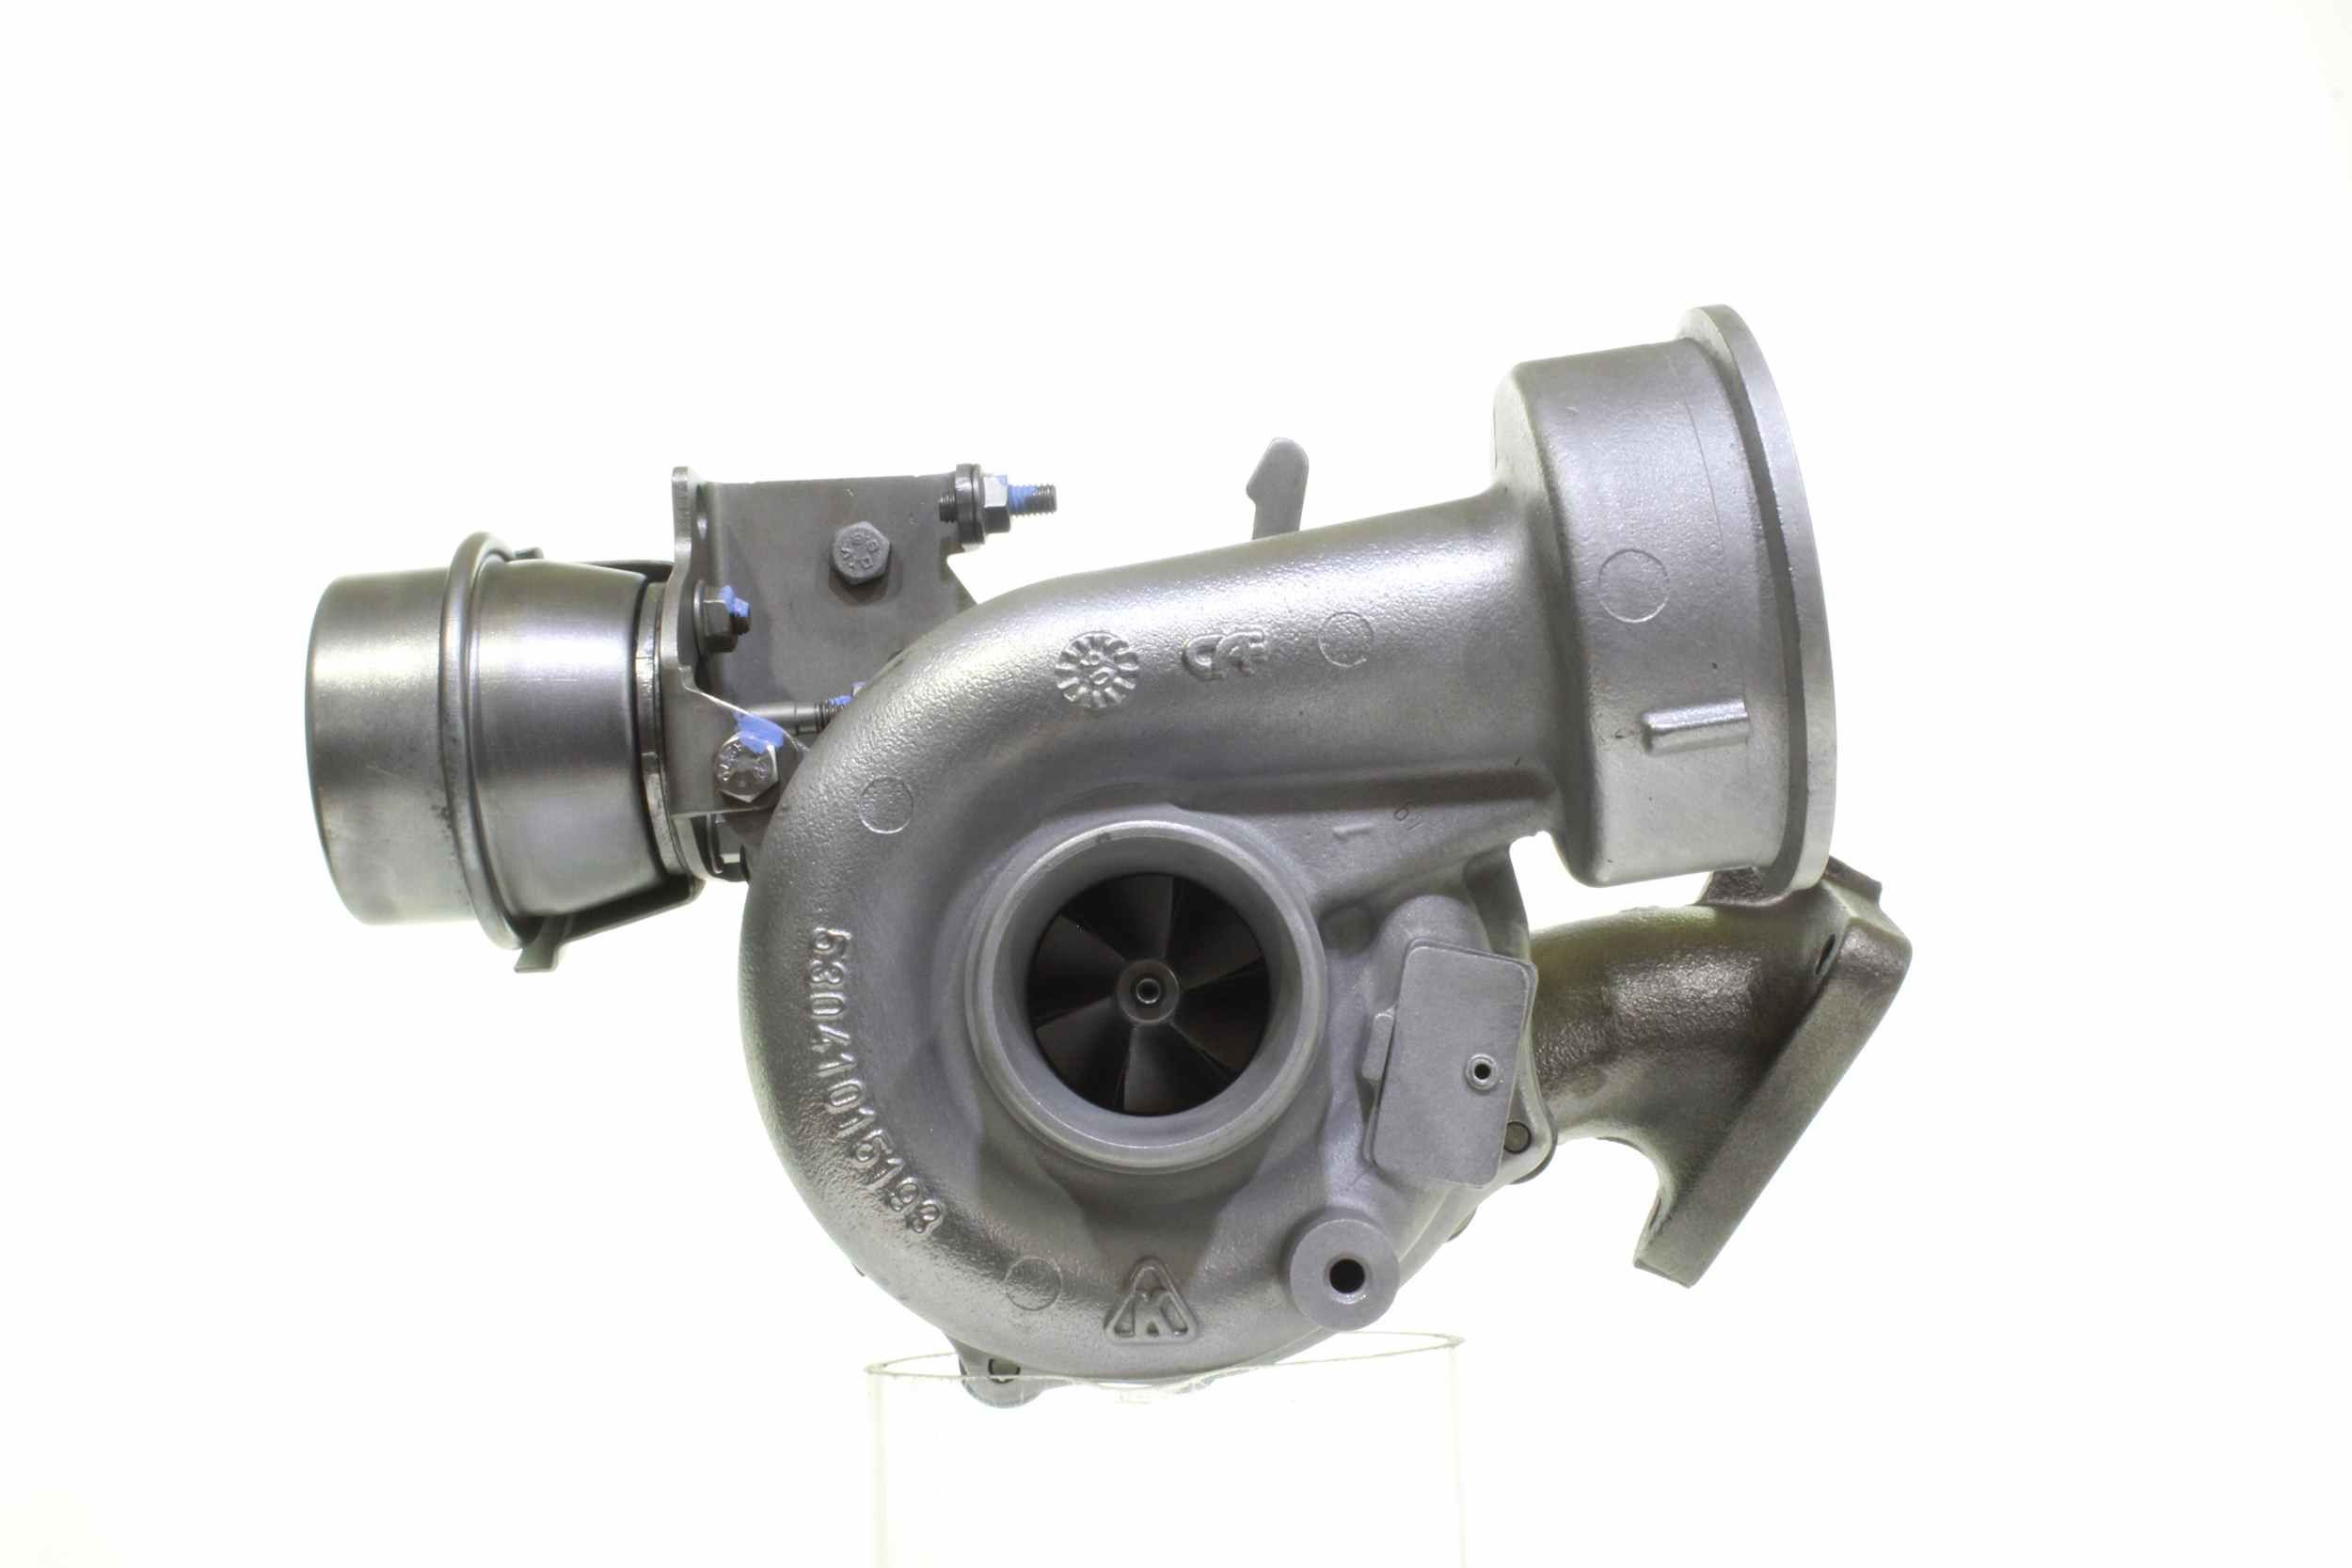 ALANKO Turbo 11900584 suitable for MERCEDES-BENZ A-Class, B-Class